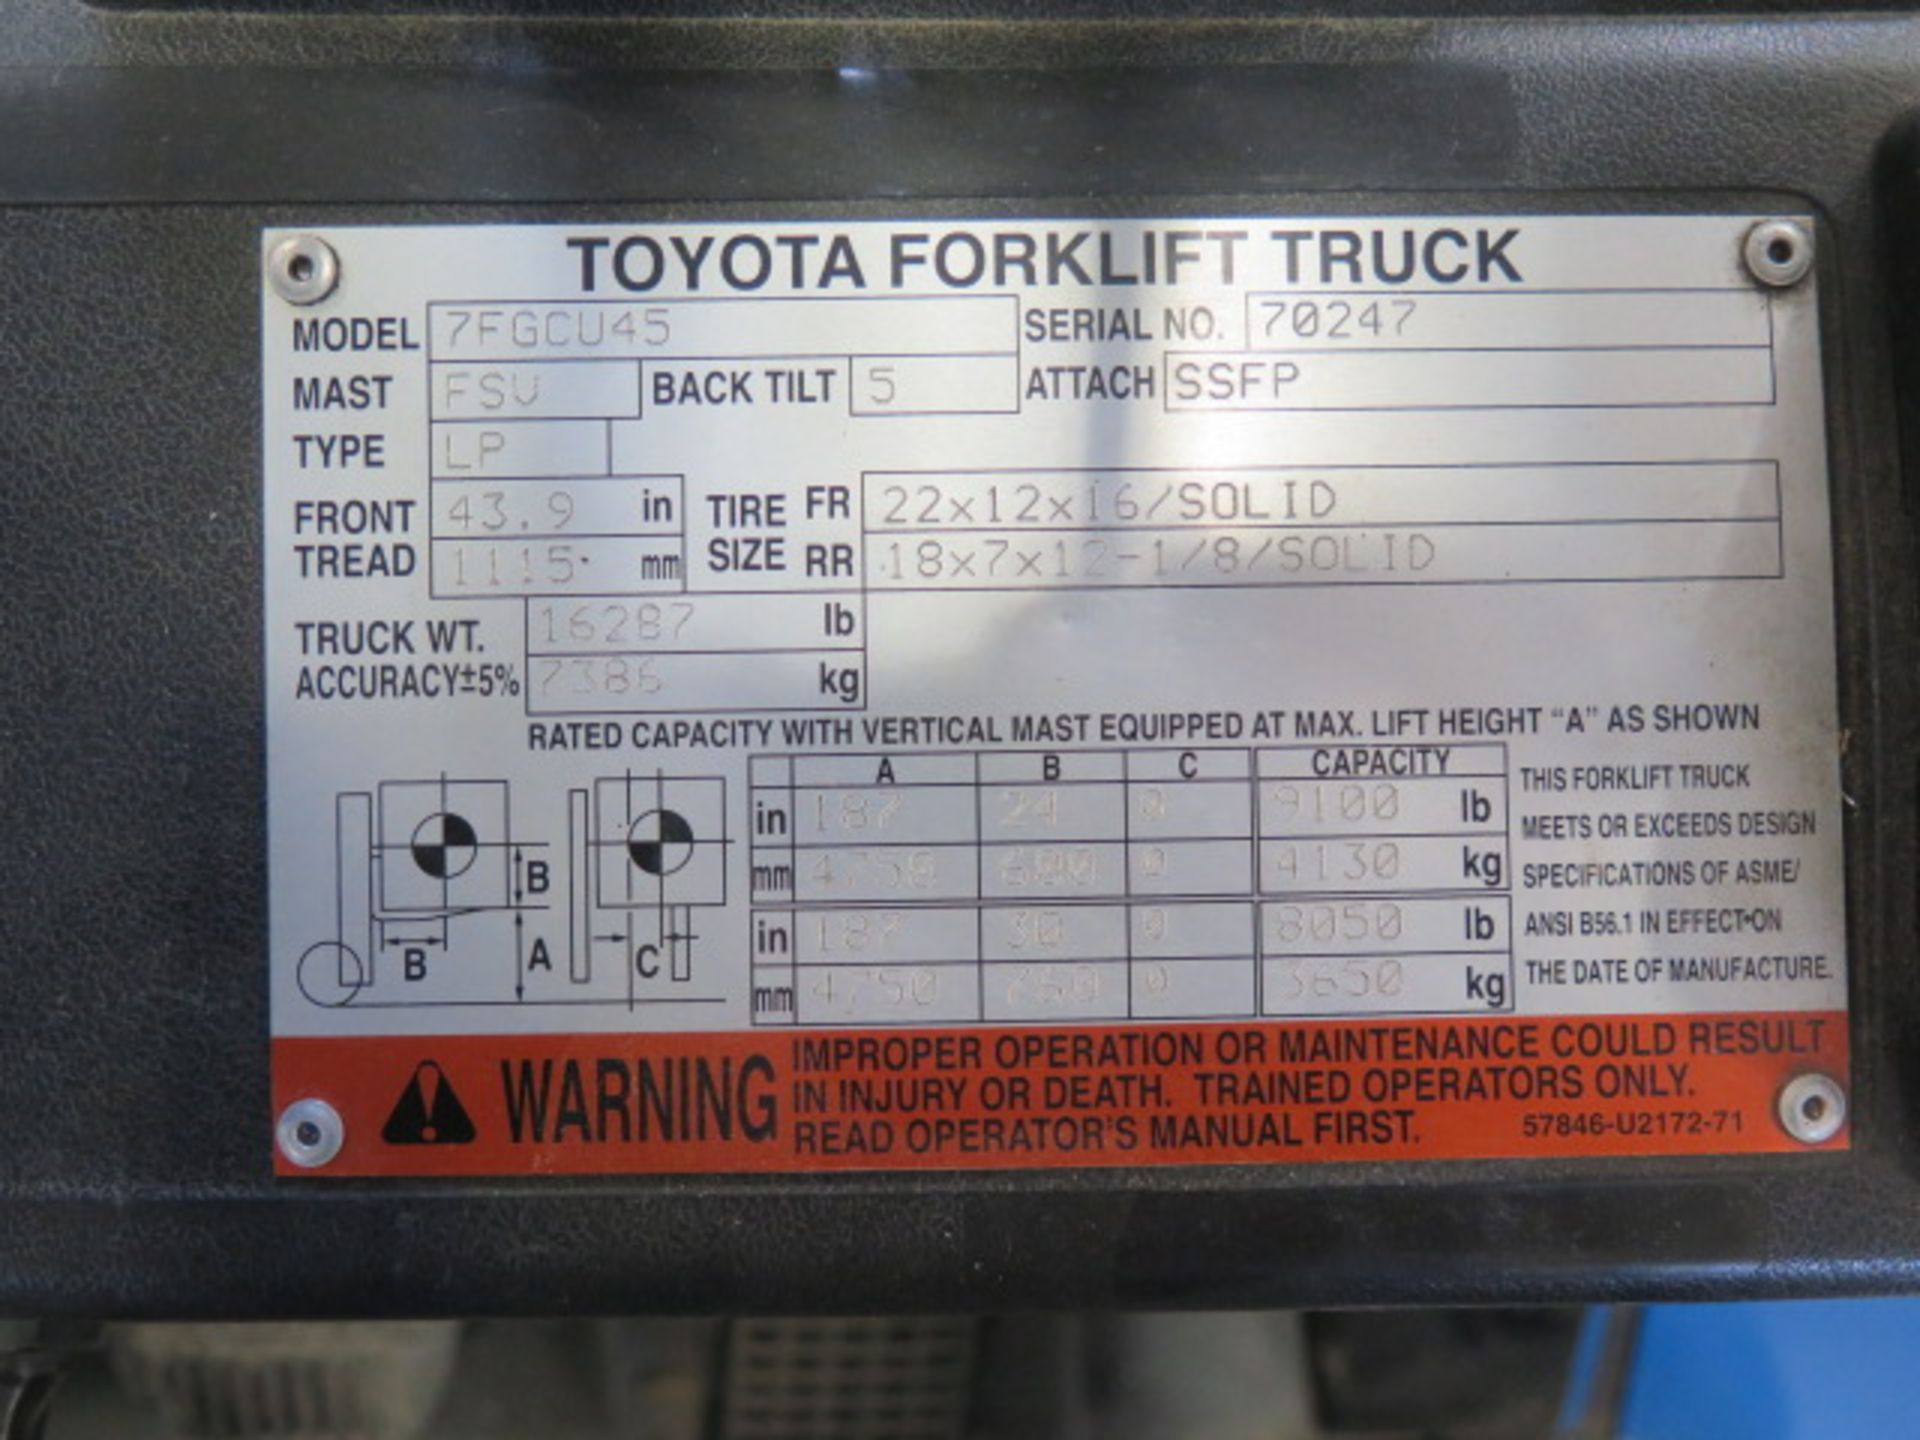 Toyota 7FGCU45 10,000 Lb Cap LPG Forklift s/n 70247 w/ 3-Stage Mast, 187” Lift height, Side Shift, - Image 13 of 13